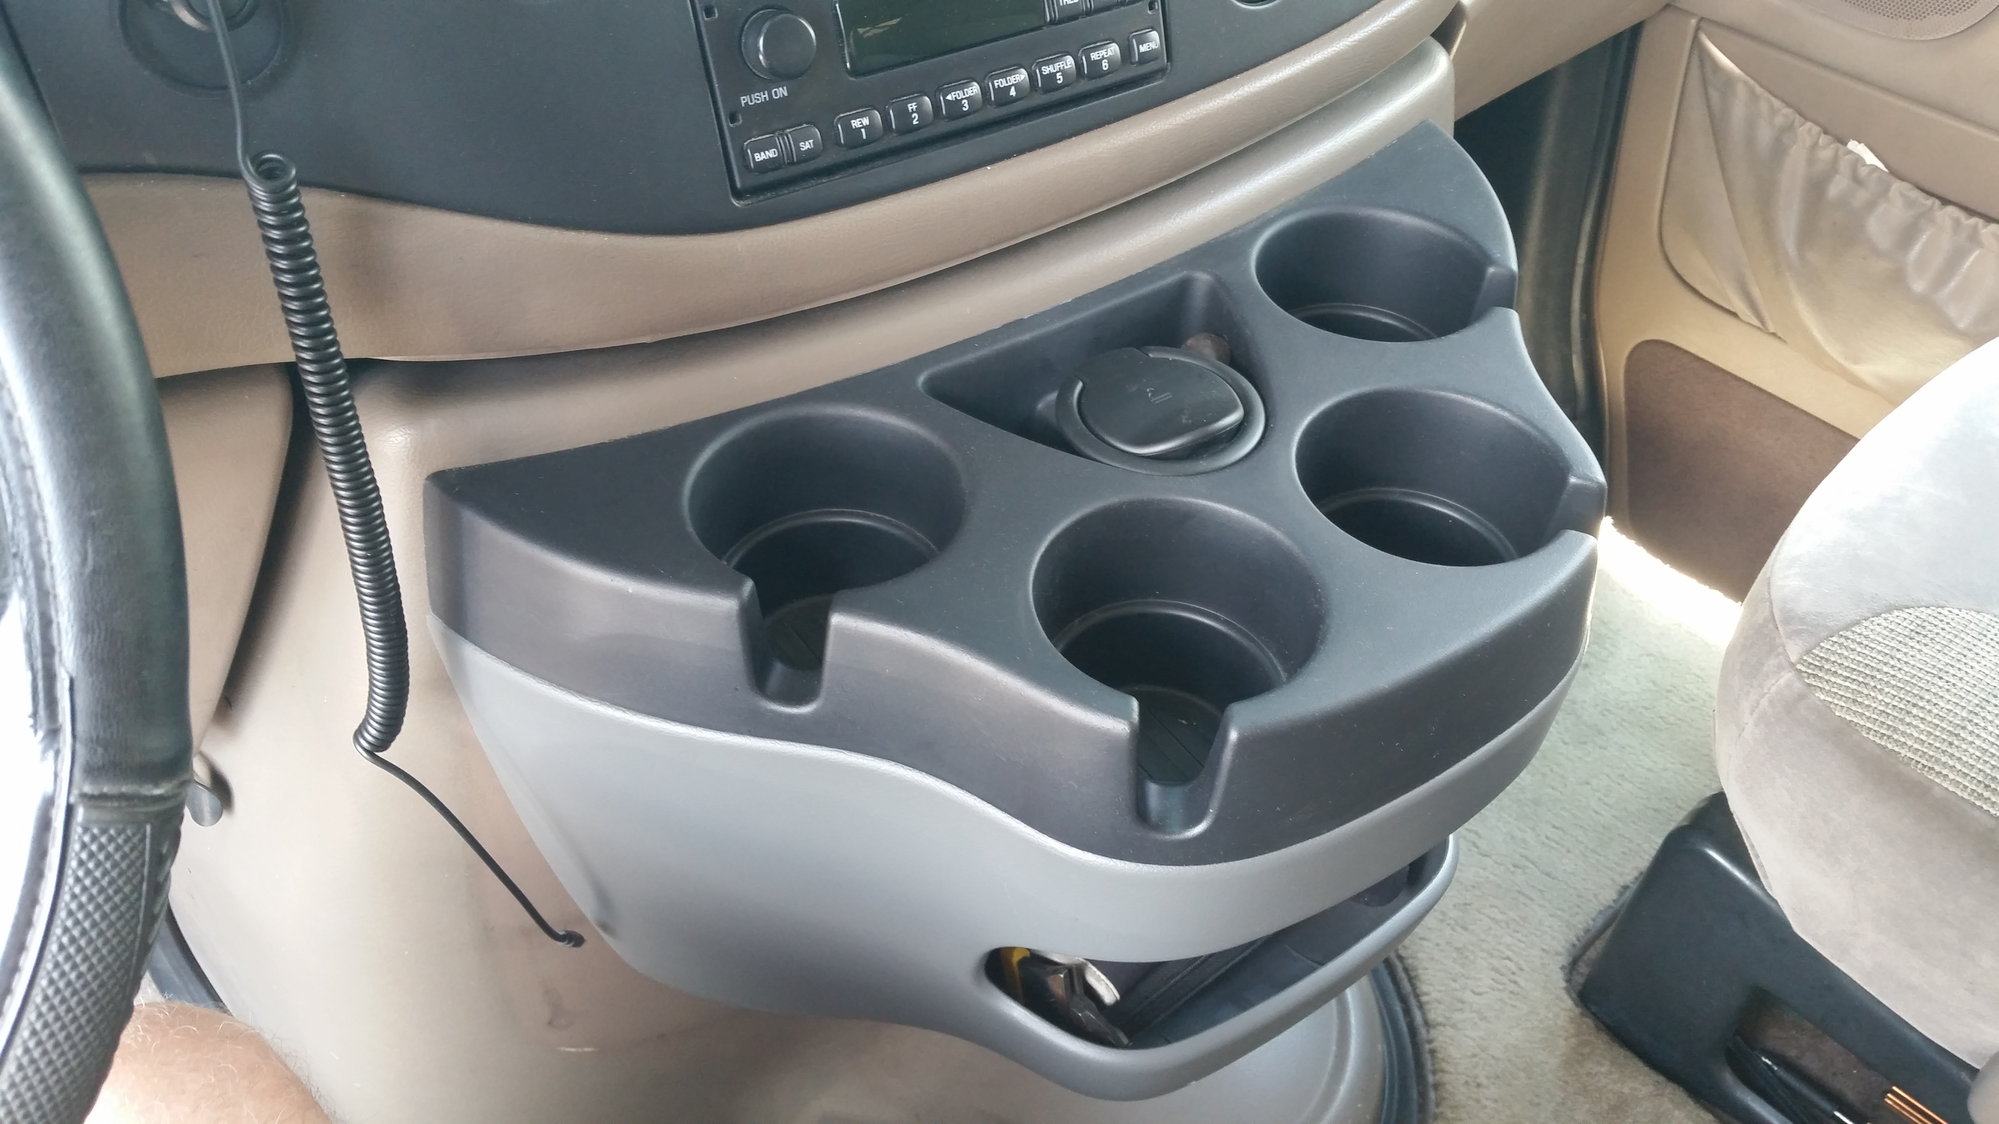 Ford Econoline Van Cutaway Console Cup Holder Page 2 Ford Truck Enthusiasts Forums